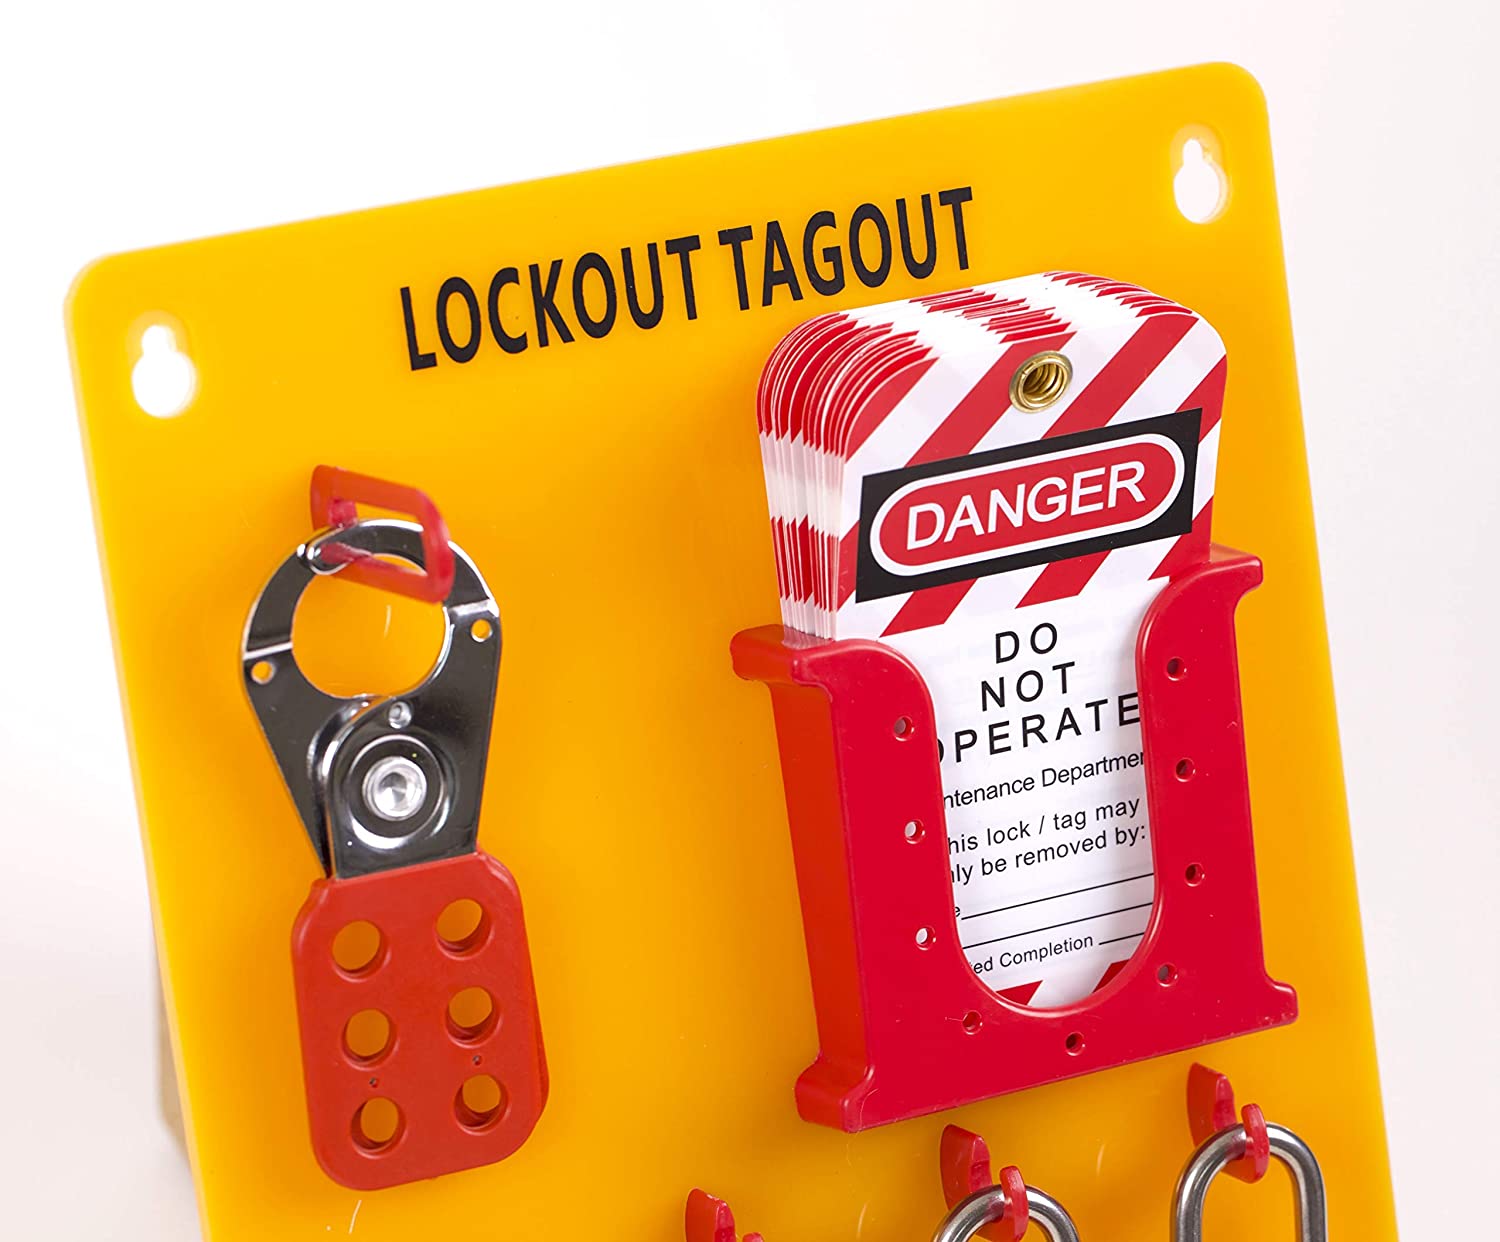 Lockout Tagout Authorized Safety Management Services